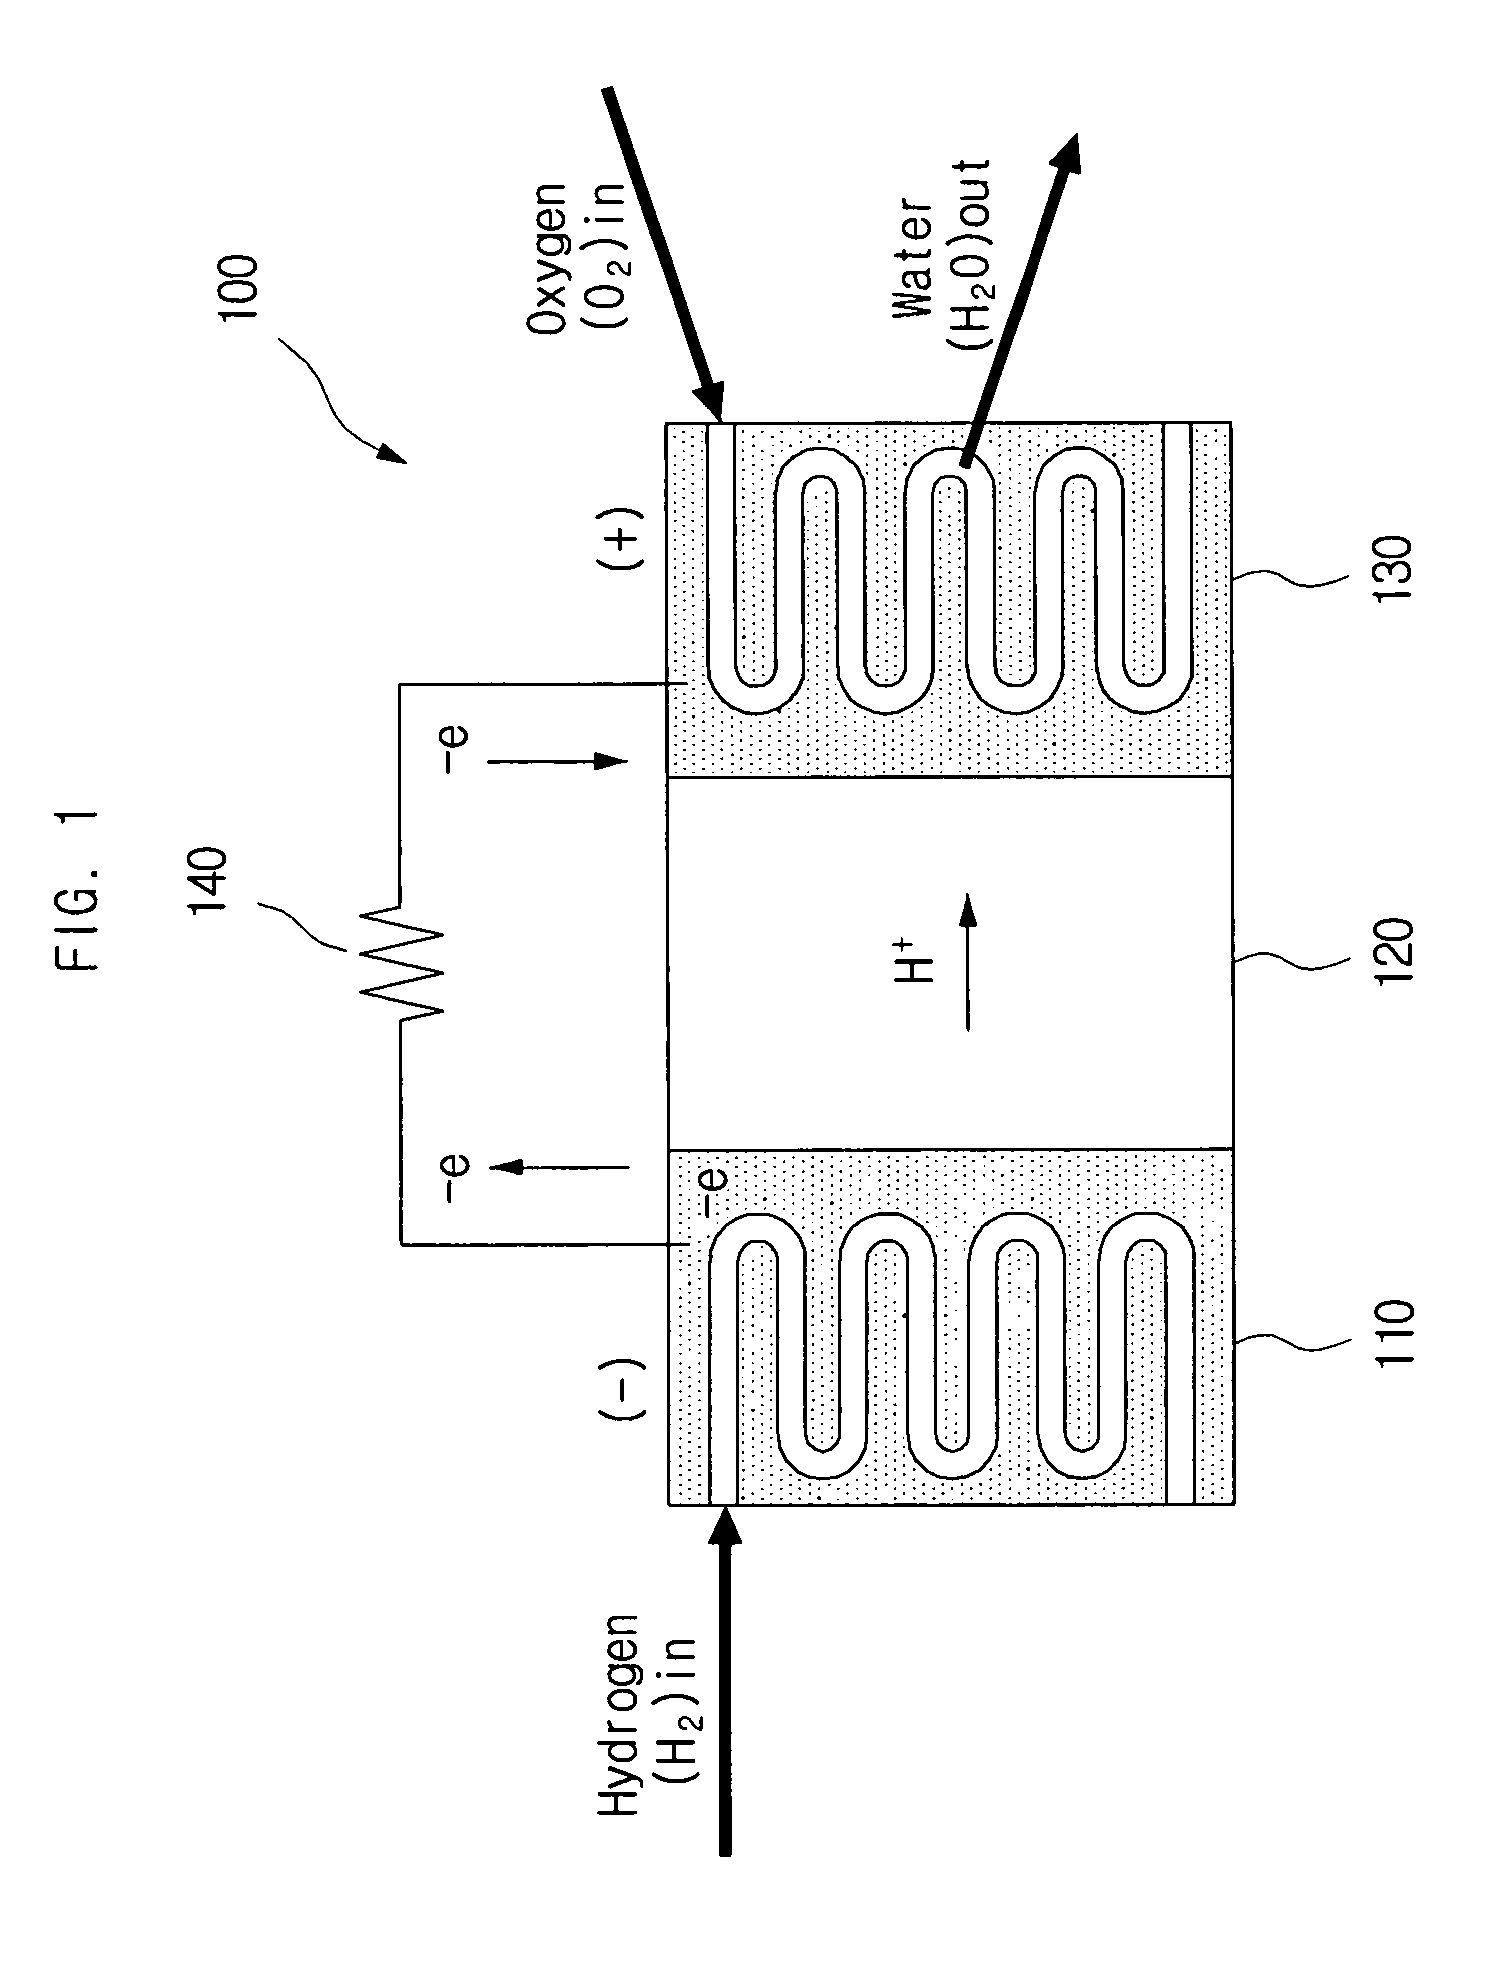 Hydrogen generating apparatus and fuel cell power generation system controlling amount of hydrogen generation